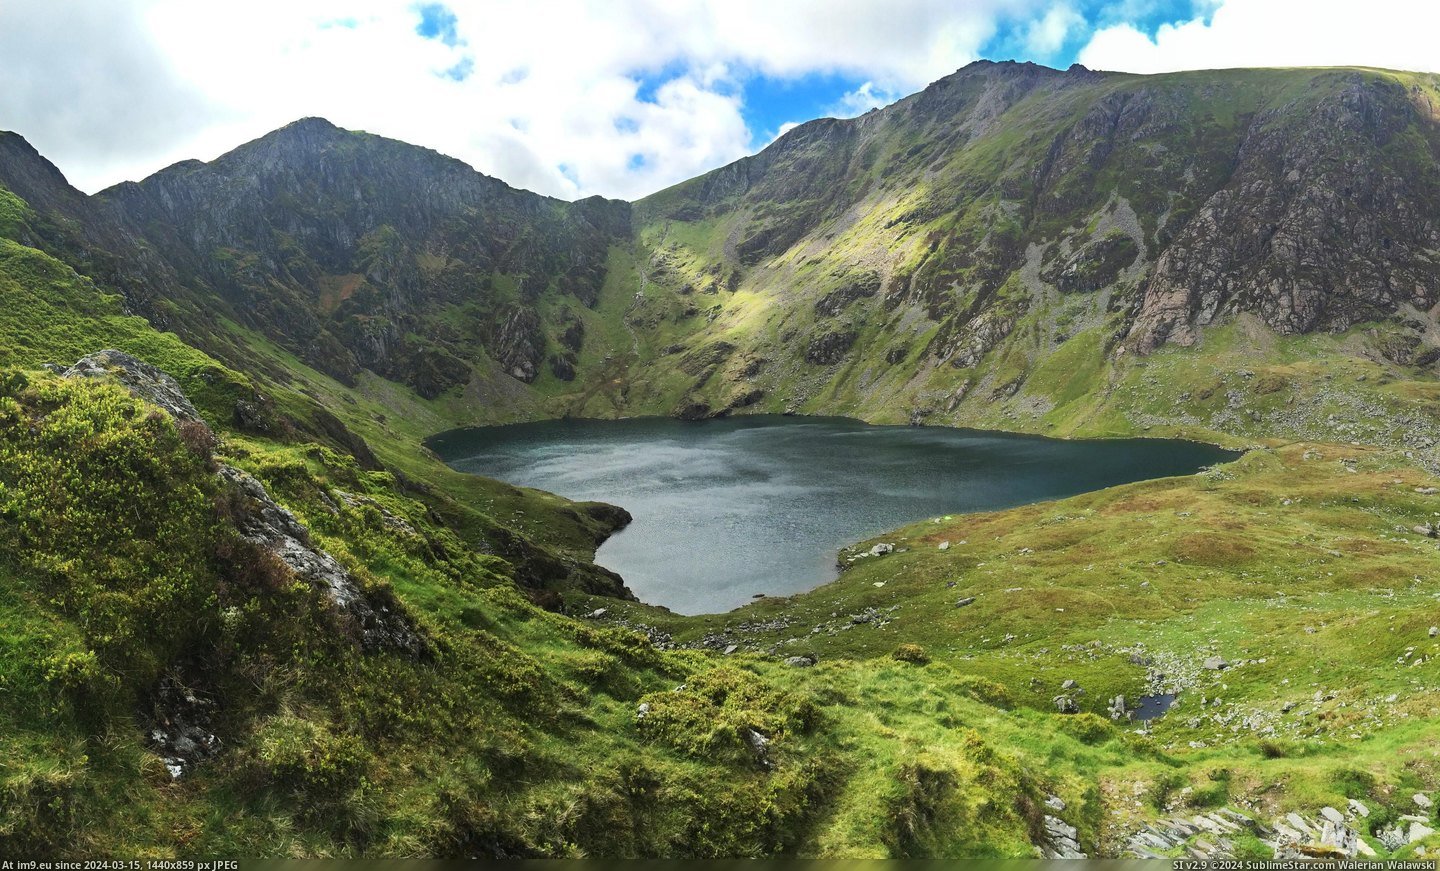 #Top #Mountain #Welsh #Poet #Sleeps #Wales [Earthporn] The Welsh say anyone who sleeps on top of the mountain comes down a poet, or a madman. Cader Idris, Wales.  [3993x23 Pic. (Изображение из альбом My r/EARTHPORN favs))